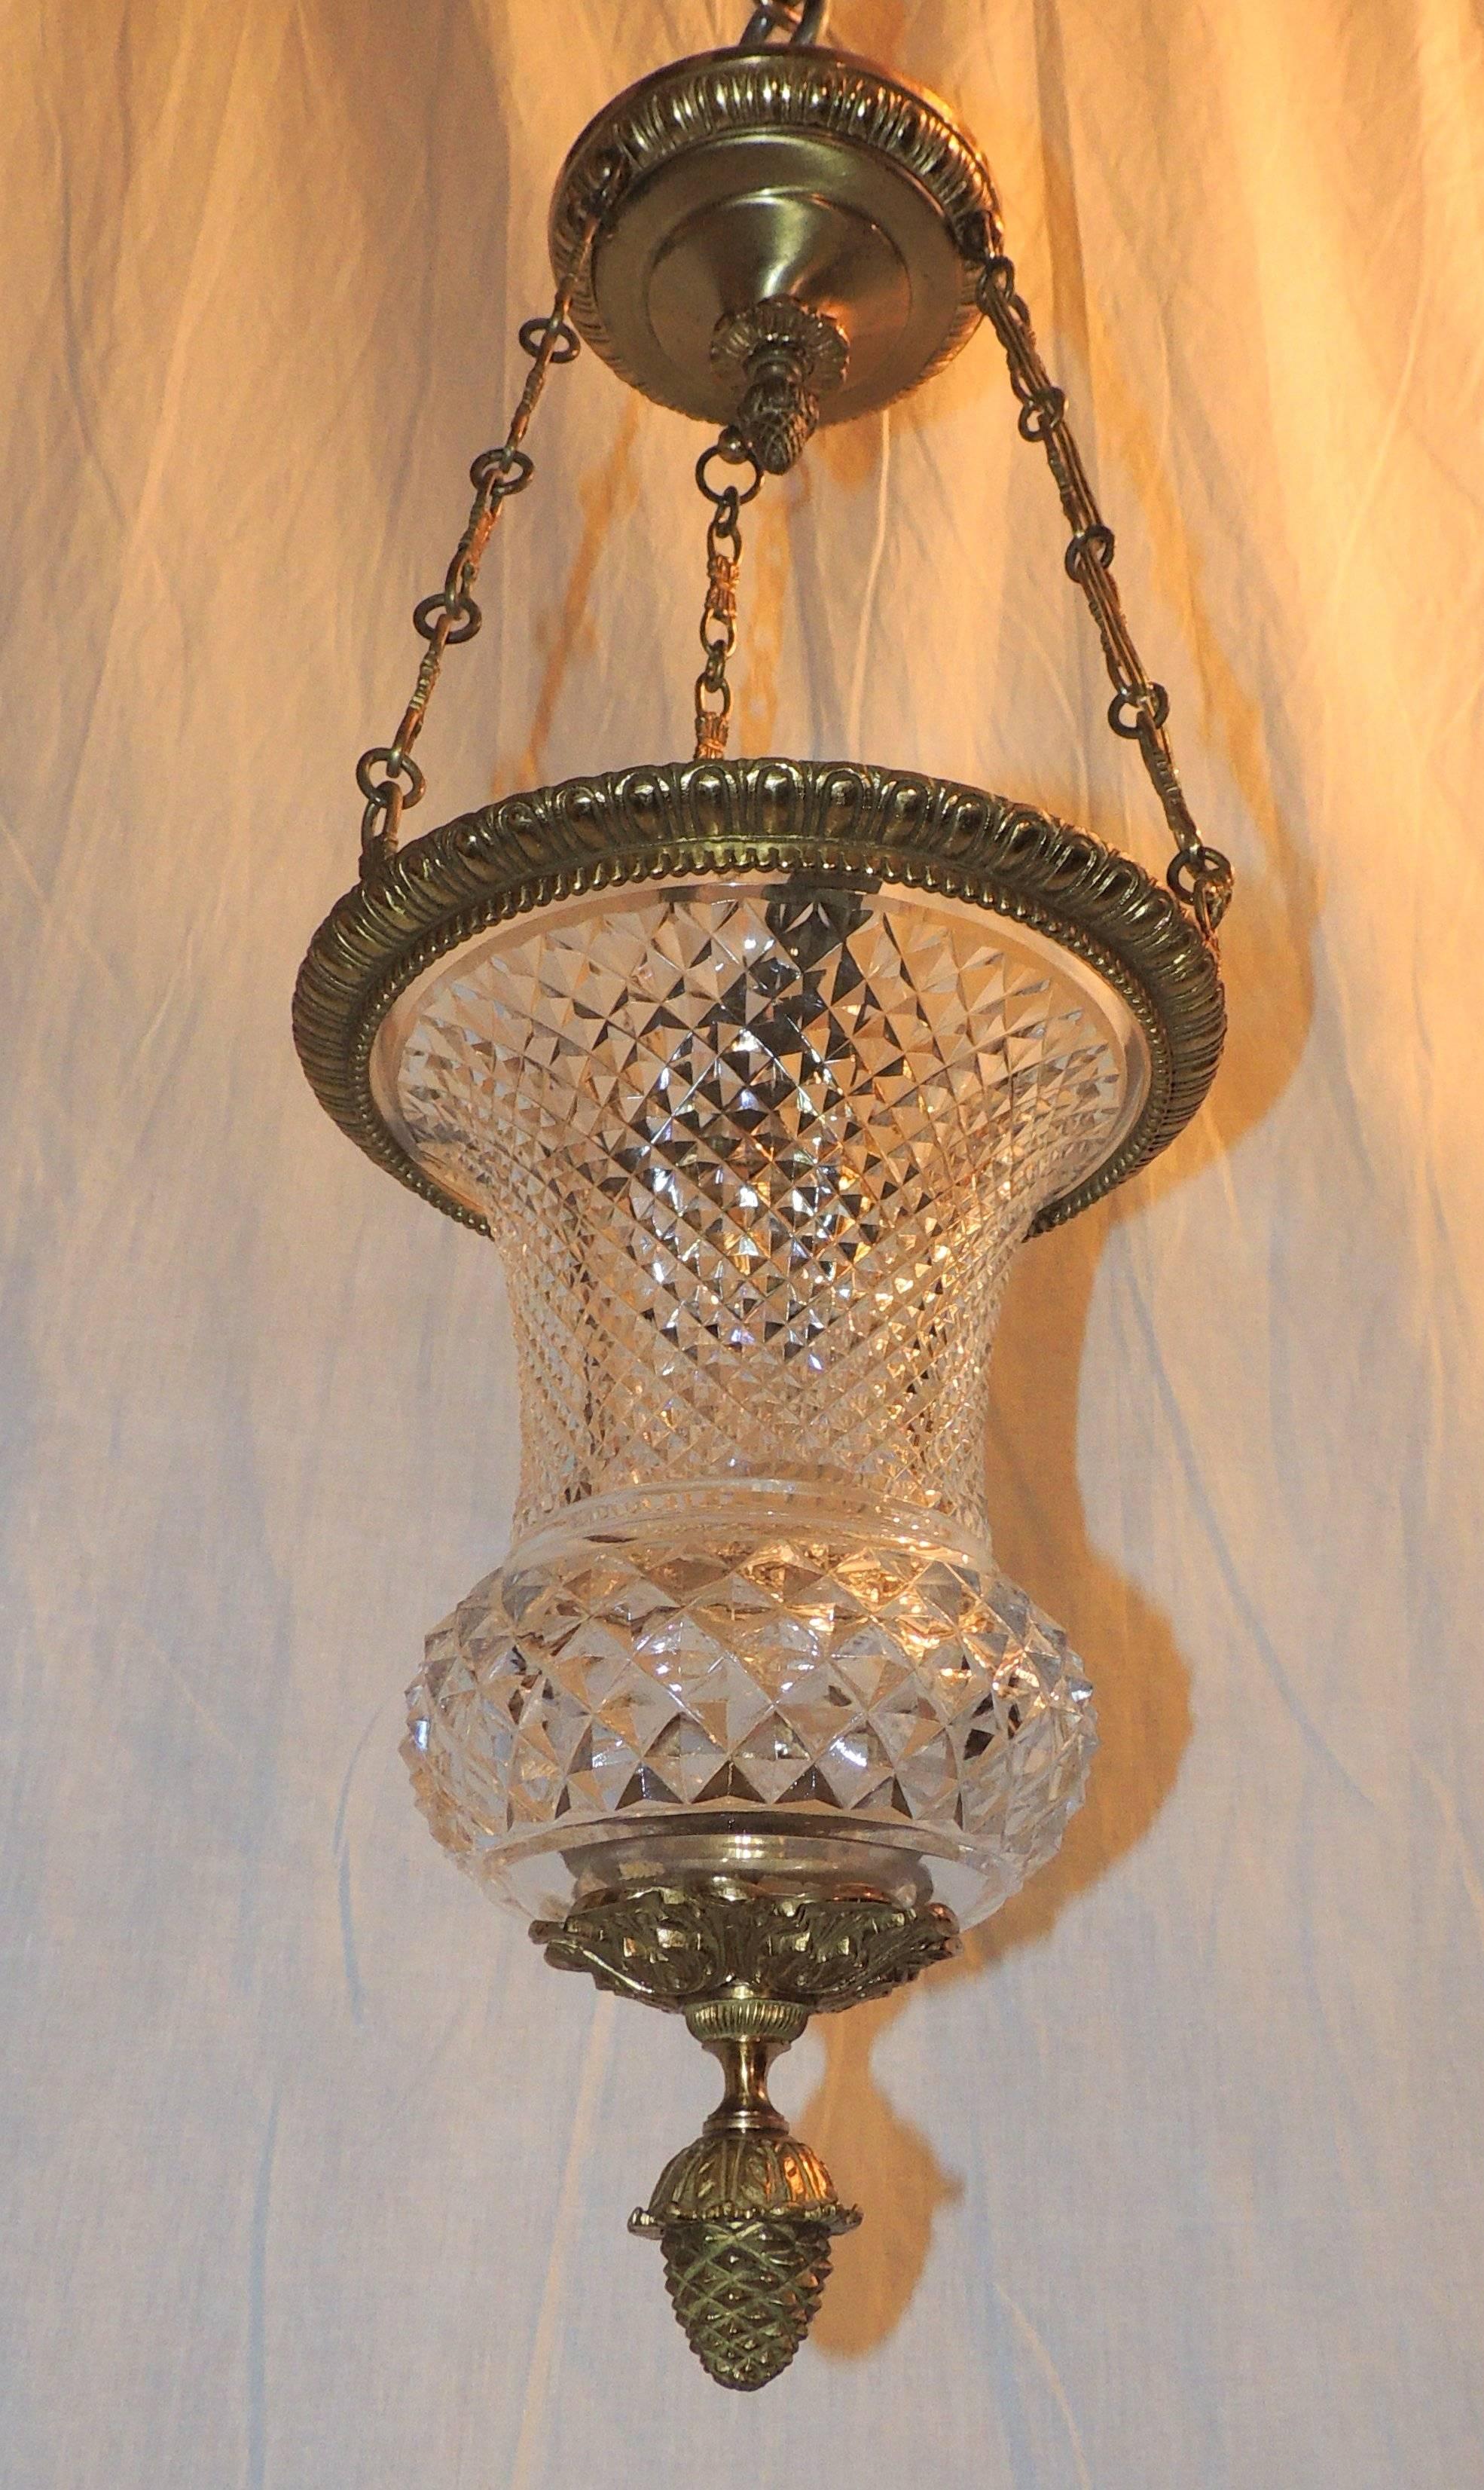 Beautiful etched design surround the rim and matching canopy. The beautiful cut-glass lantern allows the single downward light to illuminate the space.
 Acorn finials at the top and bottom give the Classic elegance to this wonderful vintage